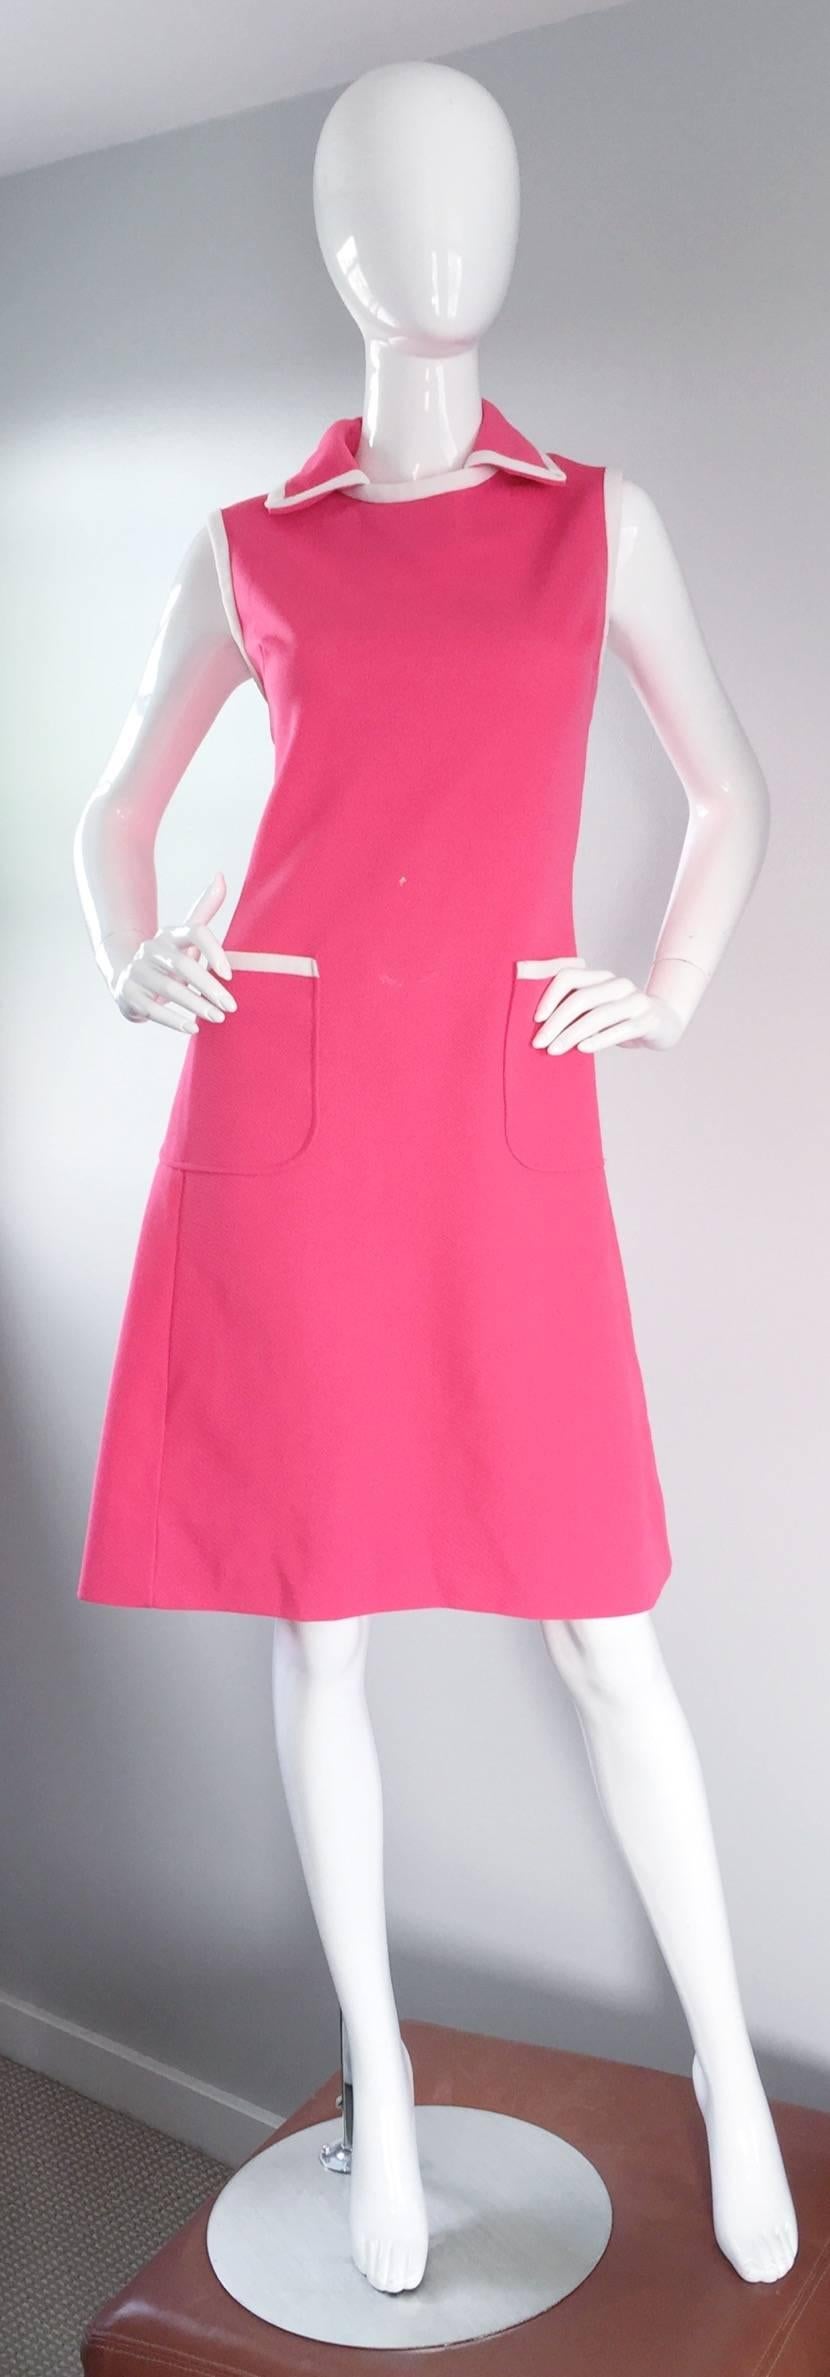 Perfect vintage PLUS SIZE I MAGNIN hot pink A-Line dress! Vibrant hot pink color, with white piping at the collar, cuffs, and two front pockets. Flattering A-Line shape is super flattering, and extremely comfortable--Very forgiving! Perfect with